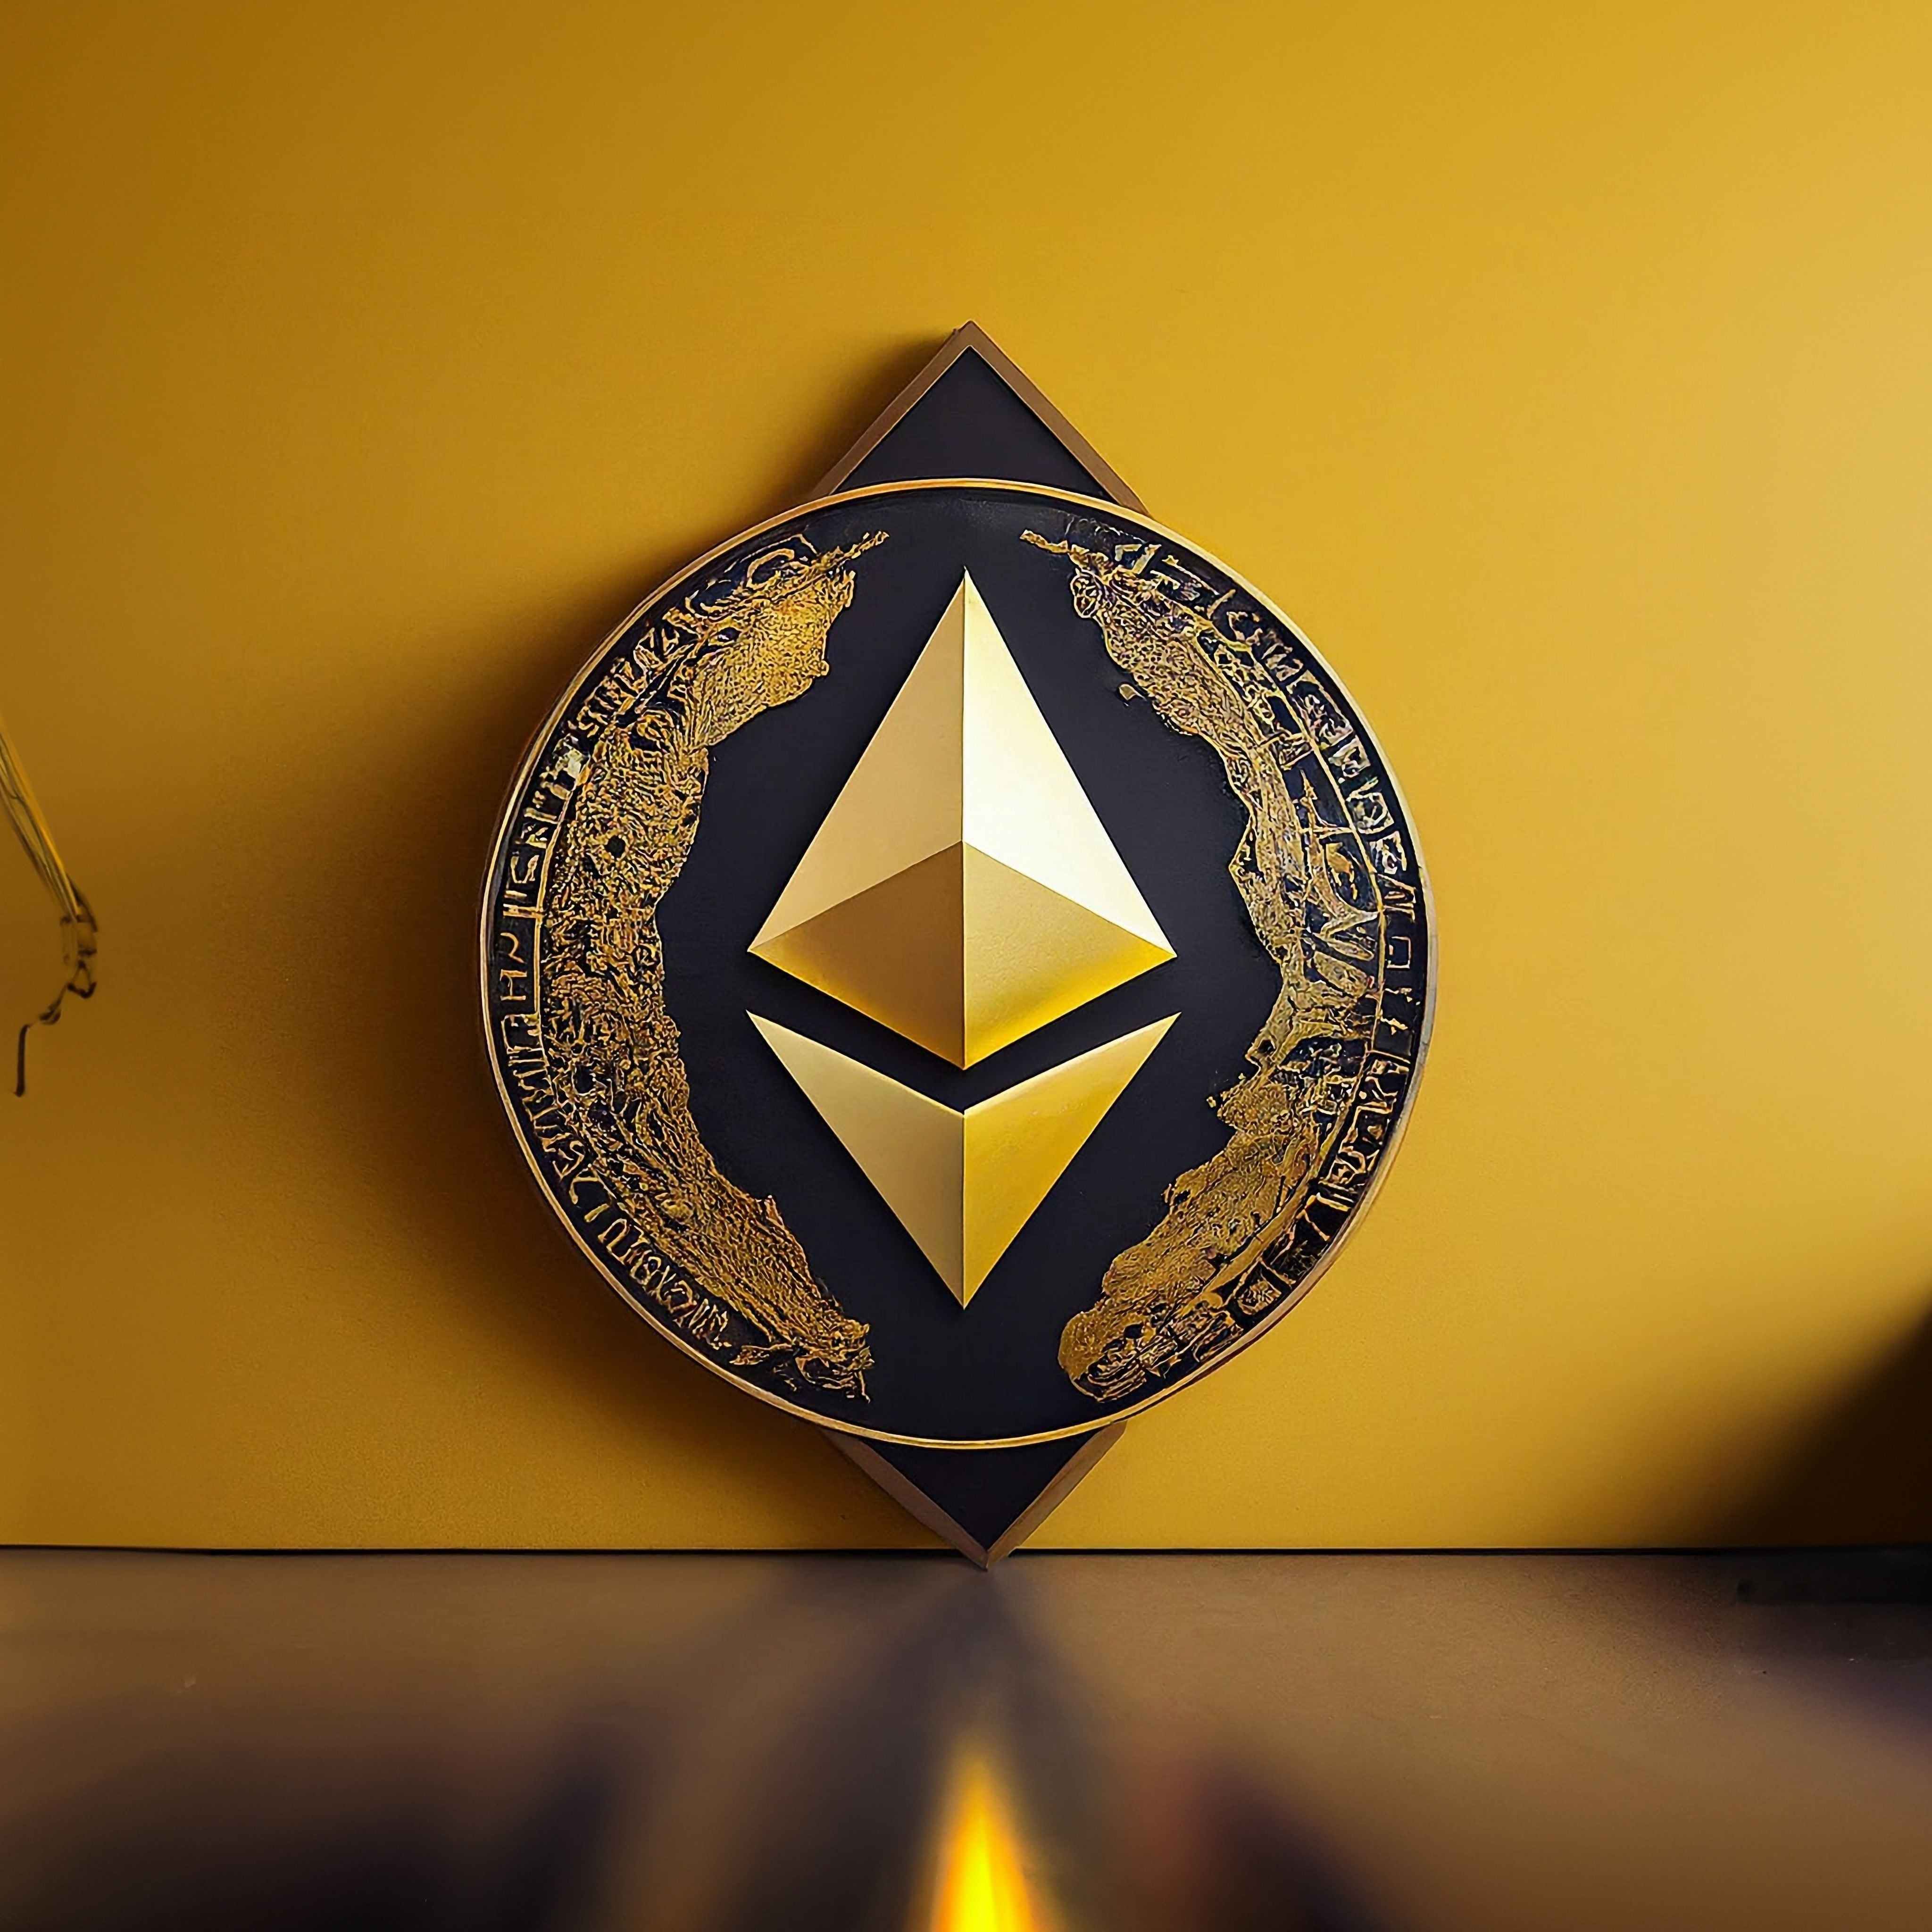 Ethereum ETFs will see $500m in inflows in their first week — analyst says